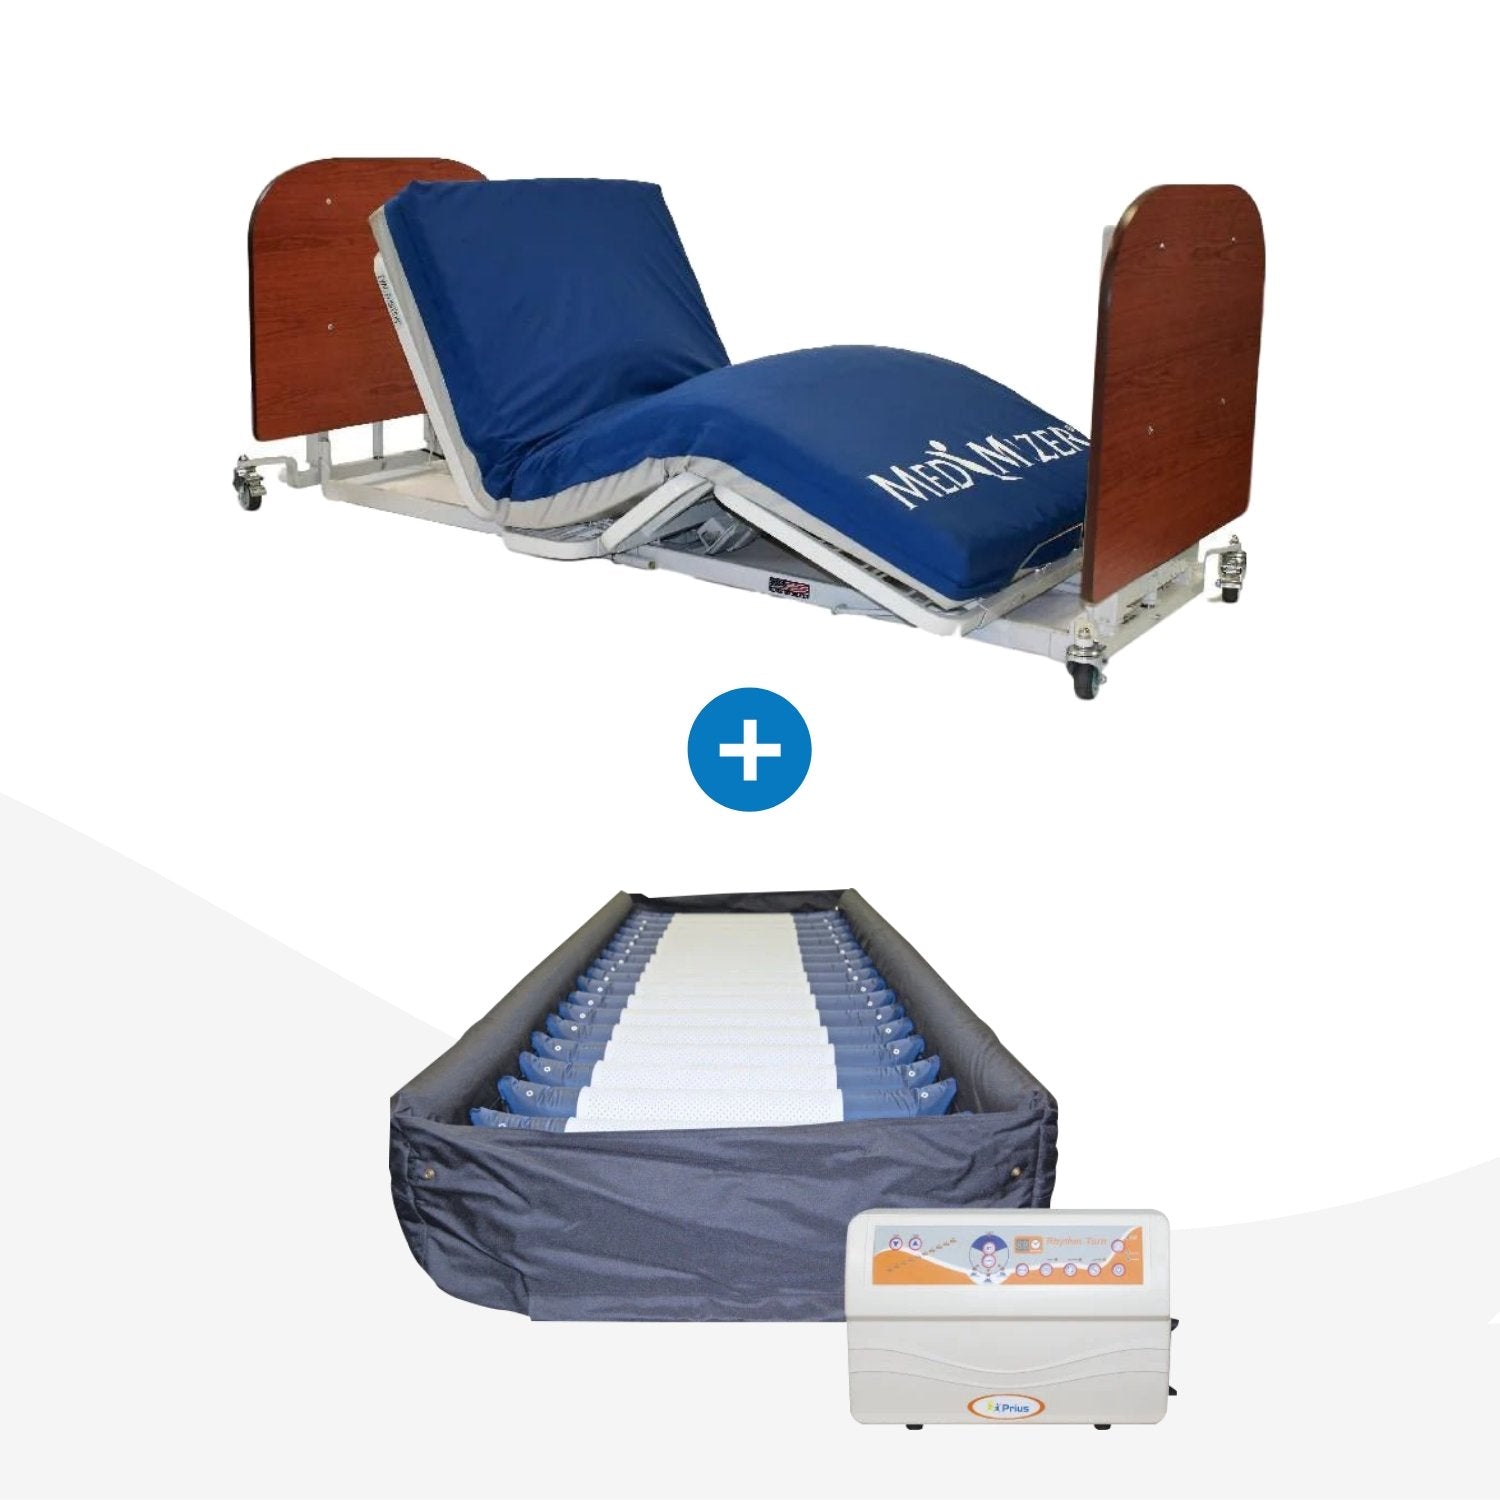 Mattress and Hospital Bed for Pressure Sores - Wound Care Mattress